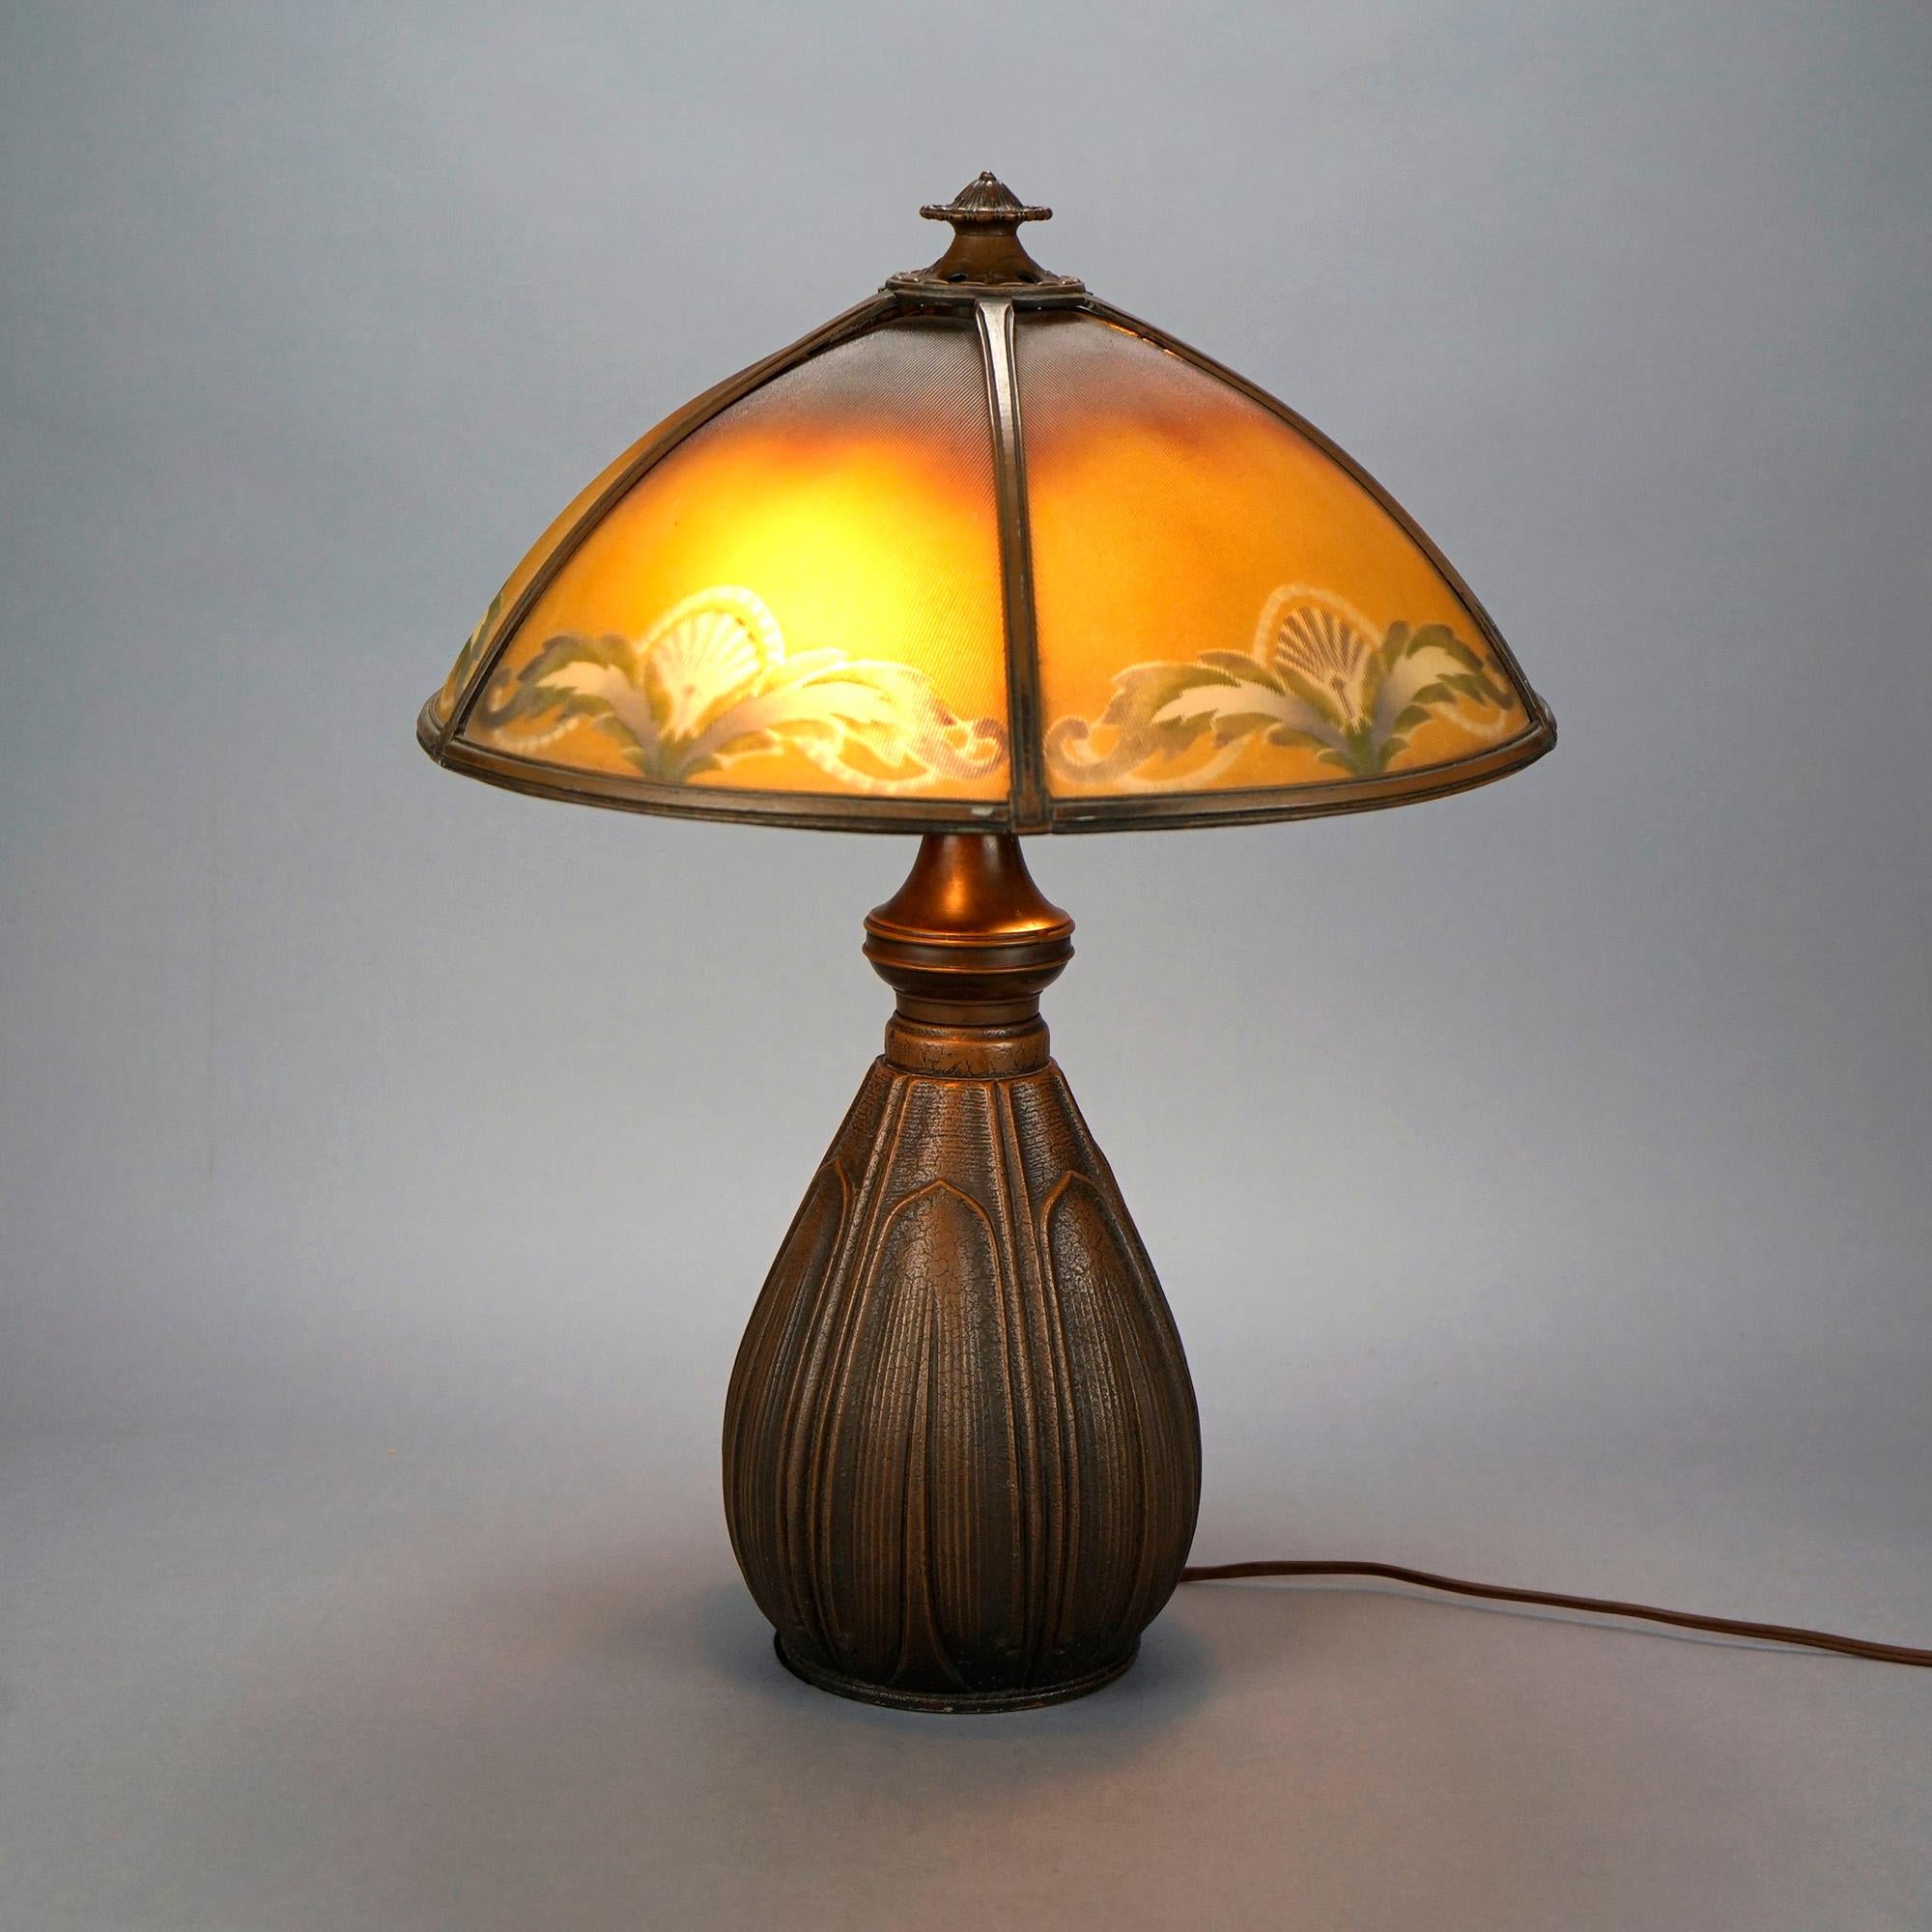 An antique Arts & Crafts table lamp by Bradley & Hubbard offers domed shade with reverse painted ribbed glass panels having foliate and stylized sunburst design surmounting double socket bulbous base having repeating pattern of stylized leaves,